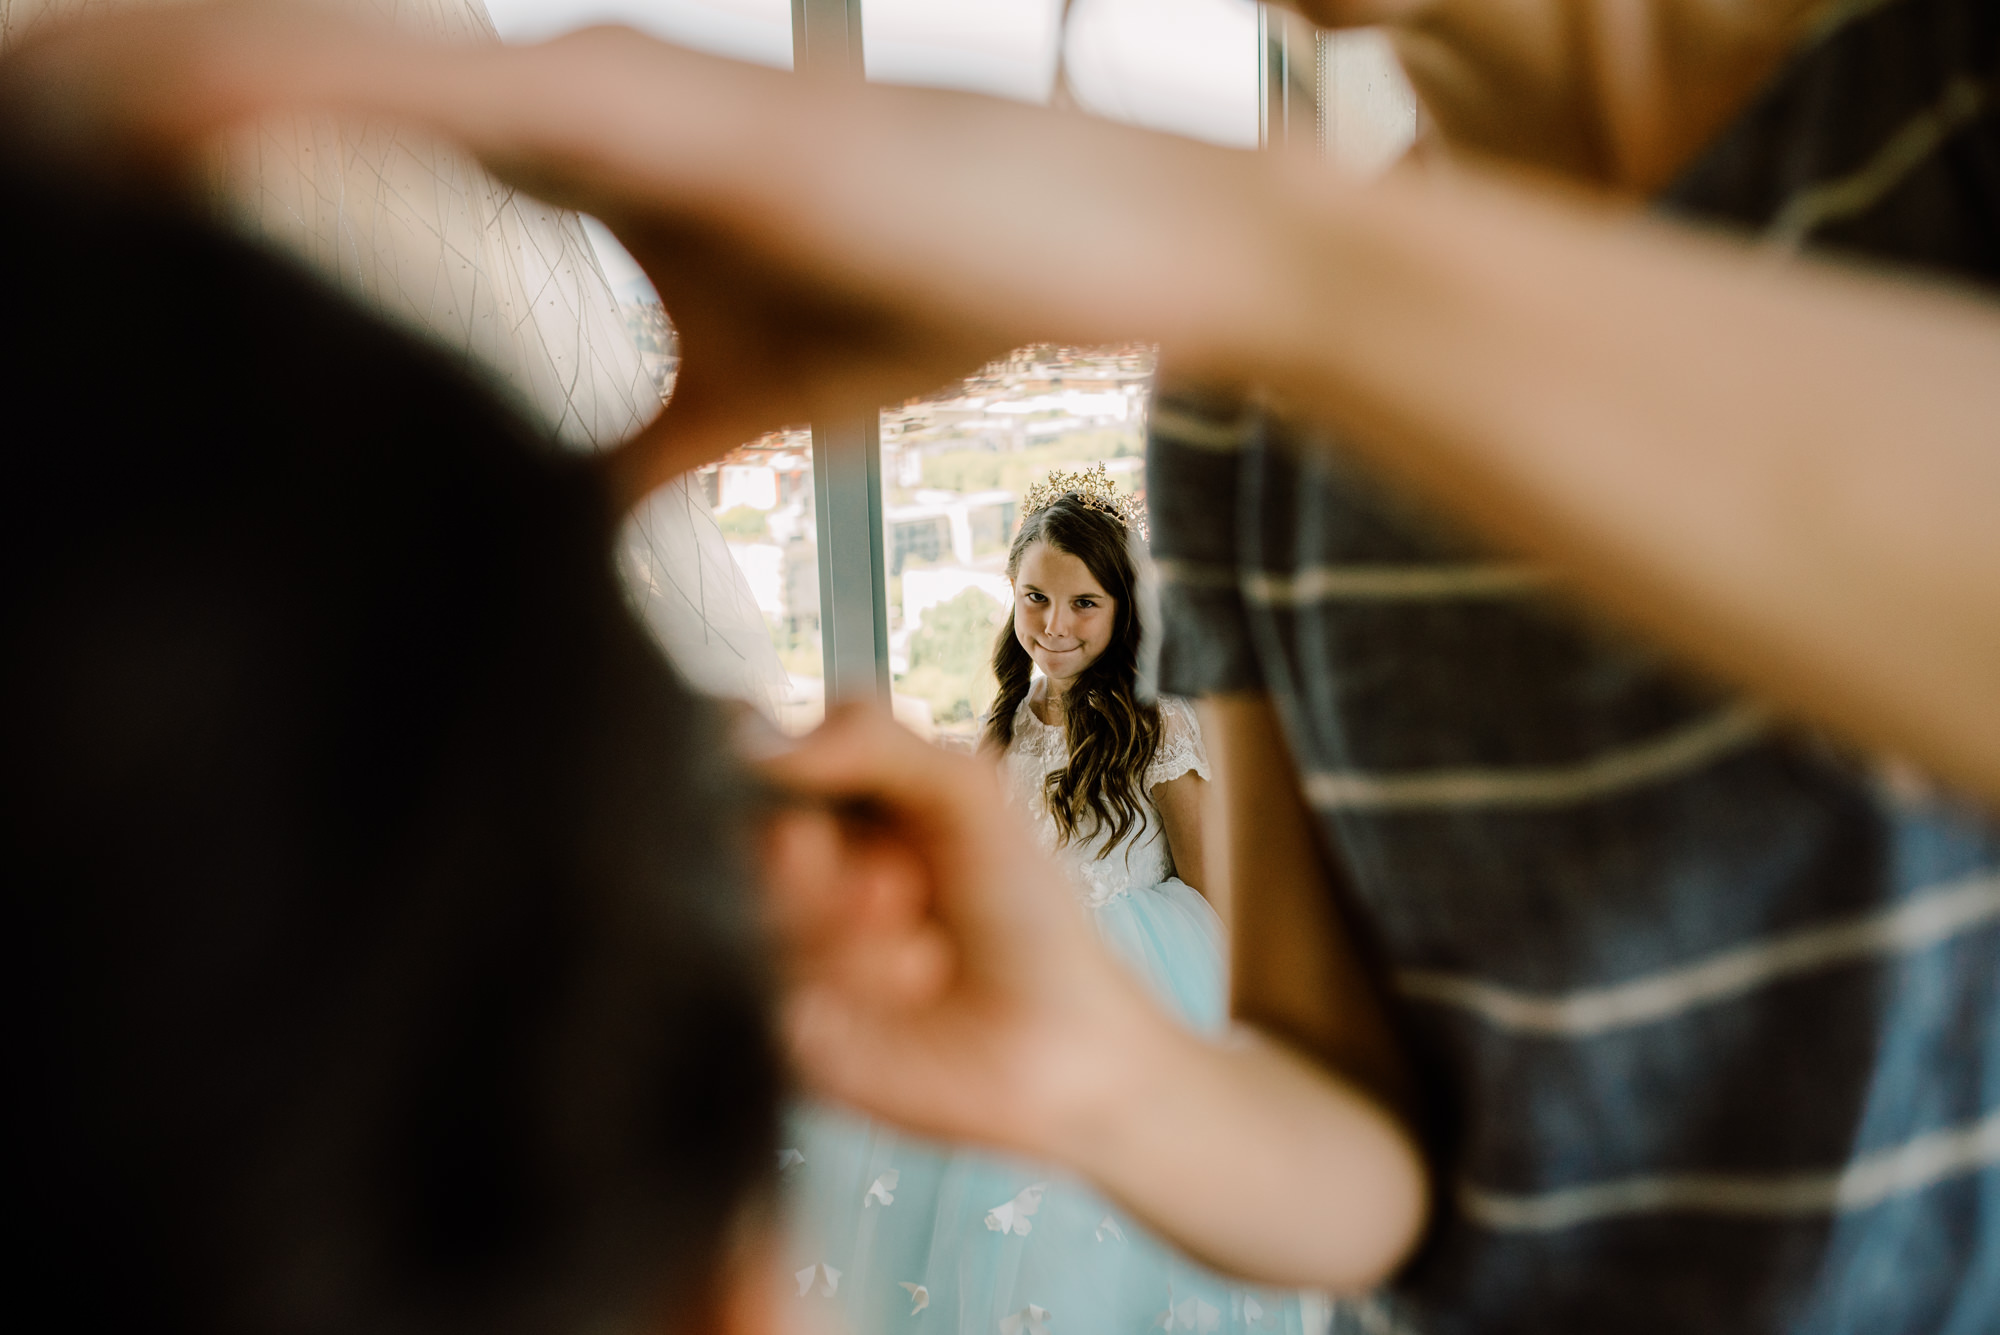 Flower girl looking at a bridesmaid getting makeup done